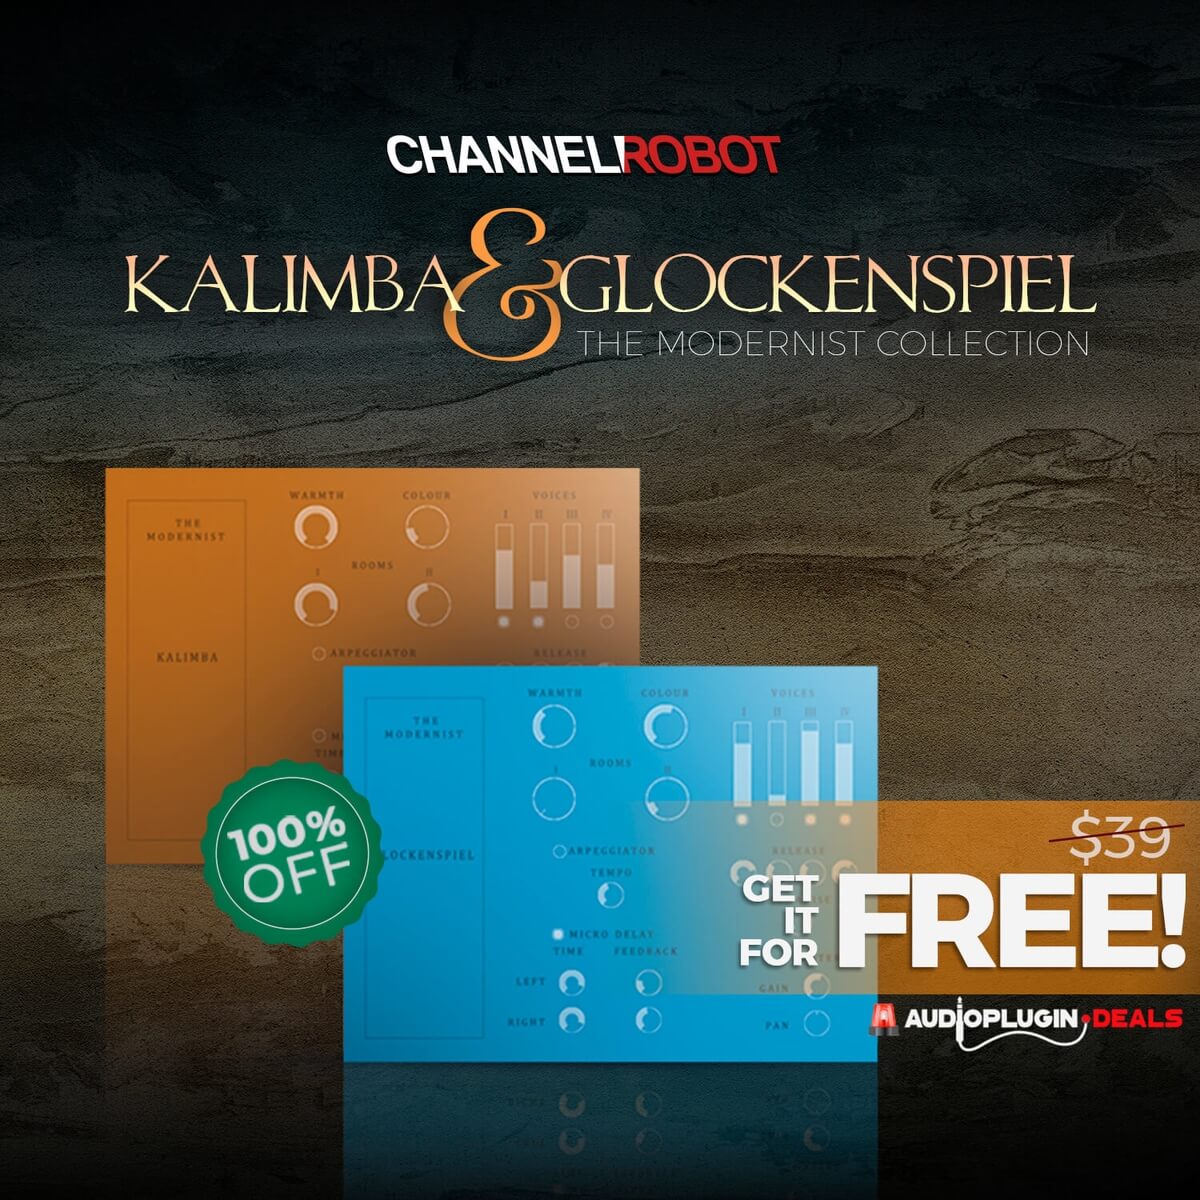 FREE: The Modernist Collection Kalimba & Glockenspiel by Channel